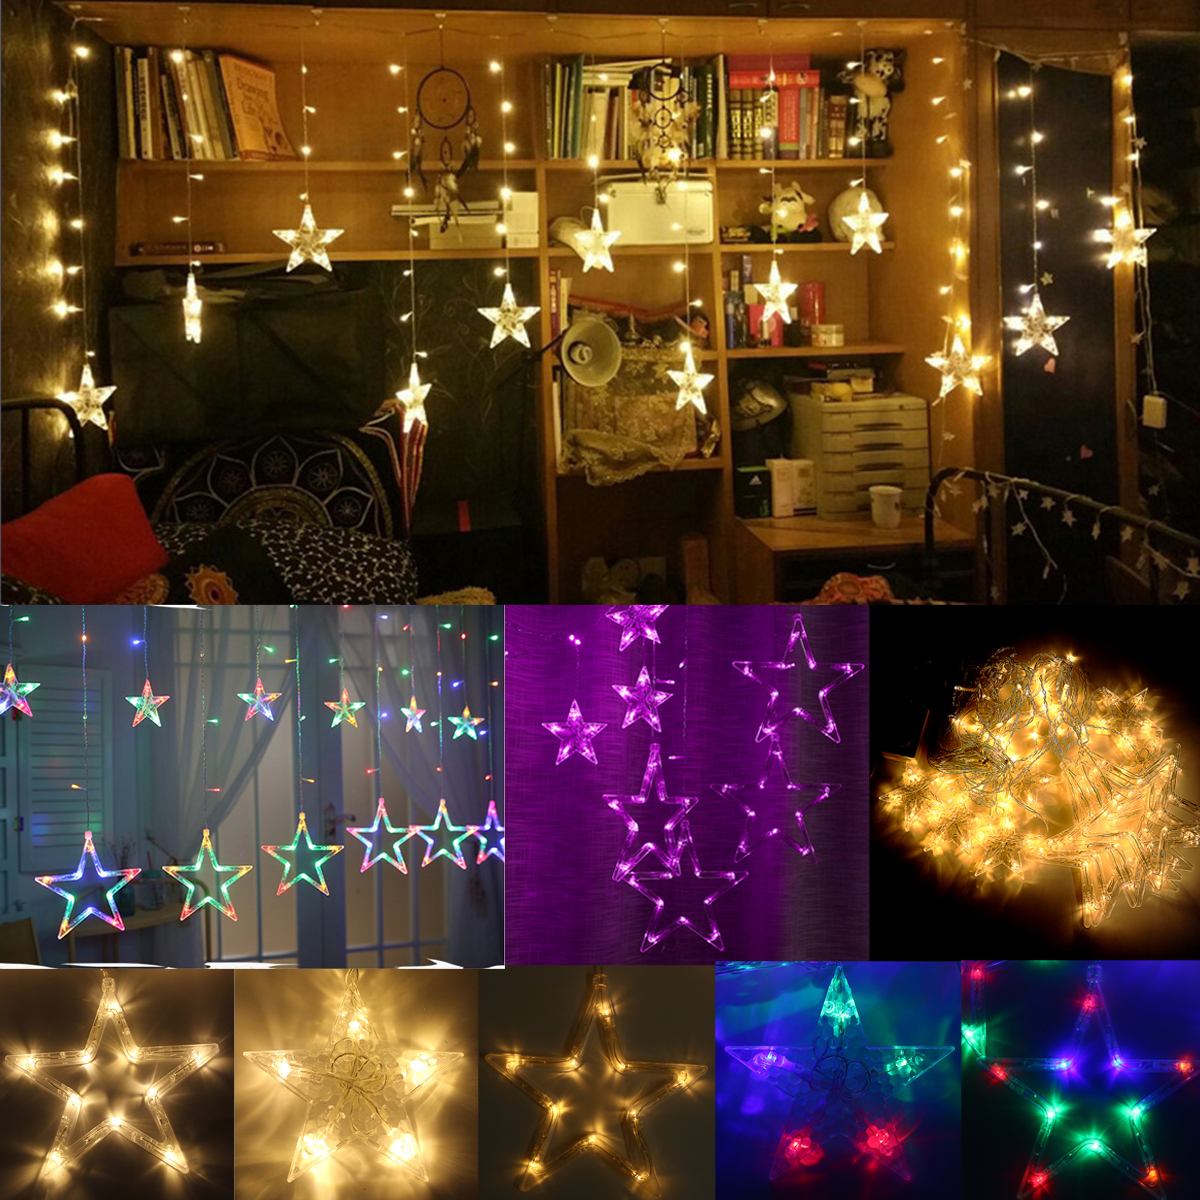 138LEDs-Star-Fairy-String-Light-House-Style-Colorful-Lamp-Wedding-Party-Holiday-Home-Christmas-Decor-1715911-1